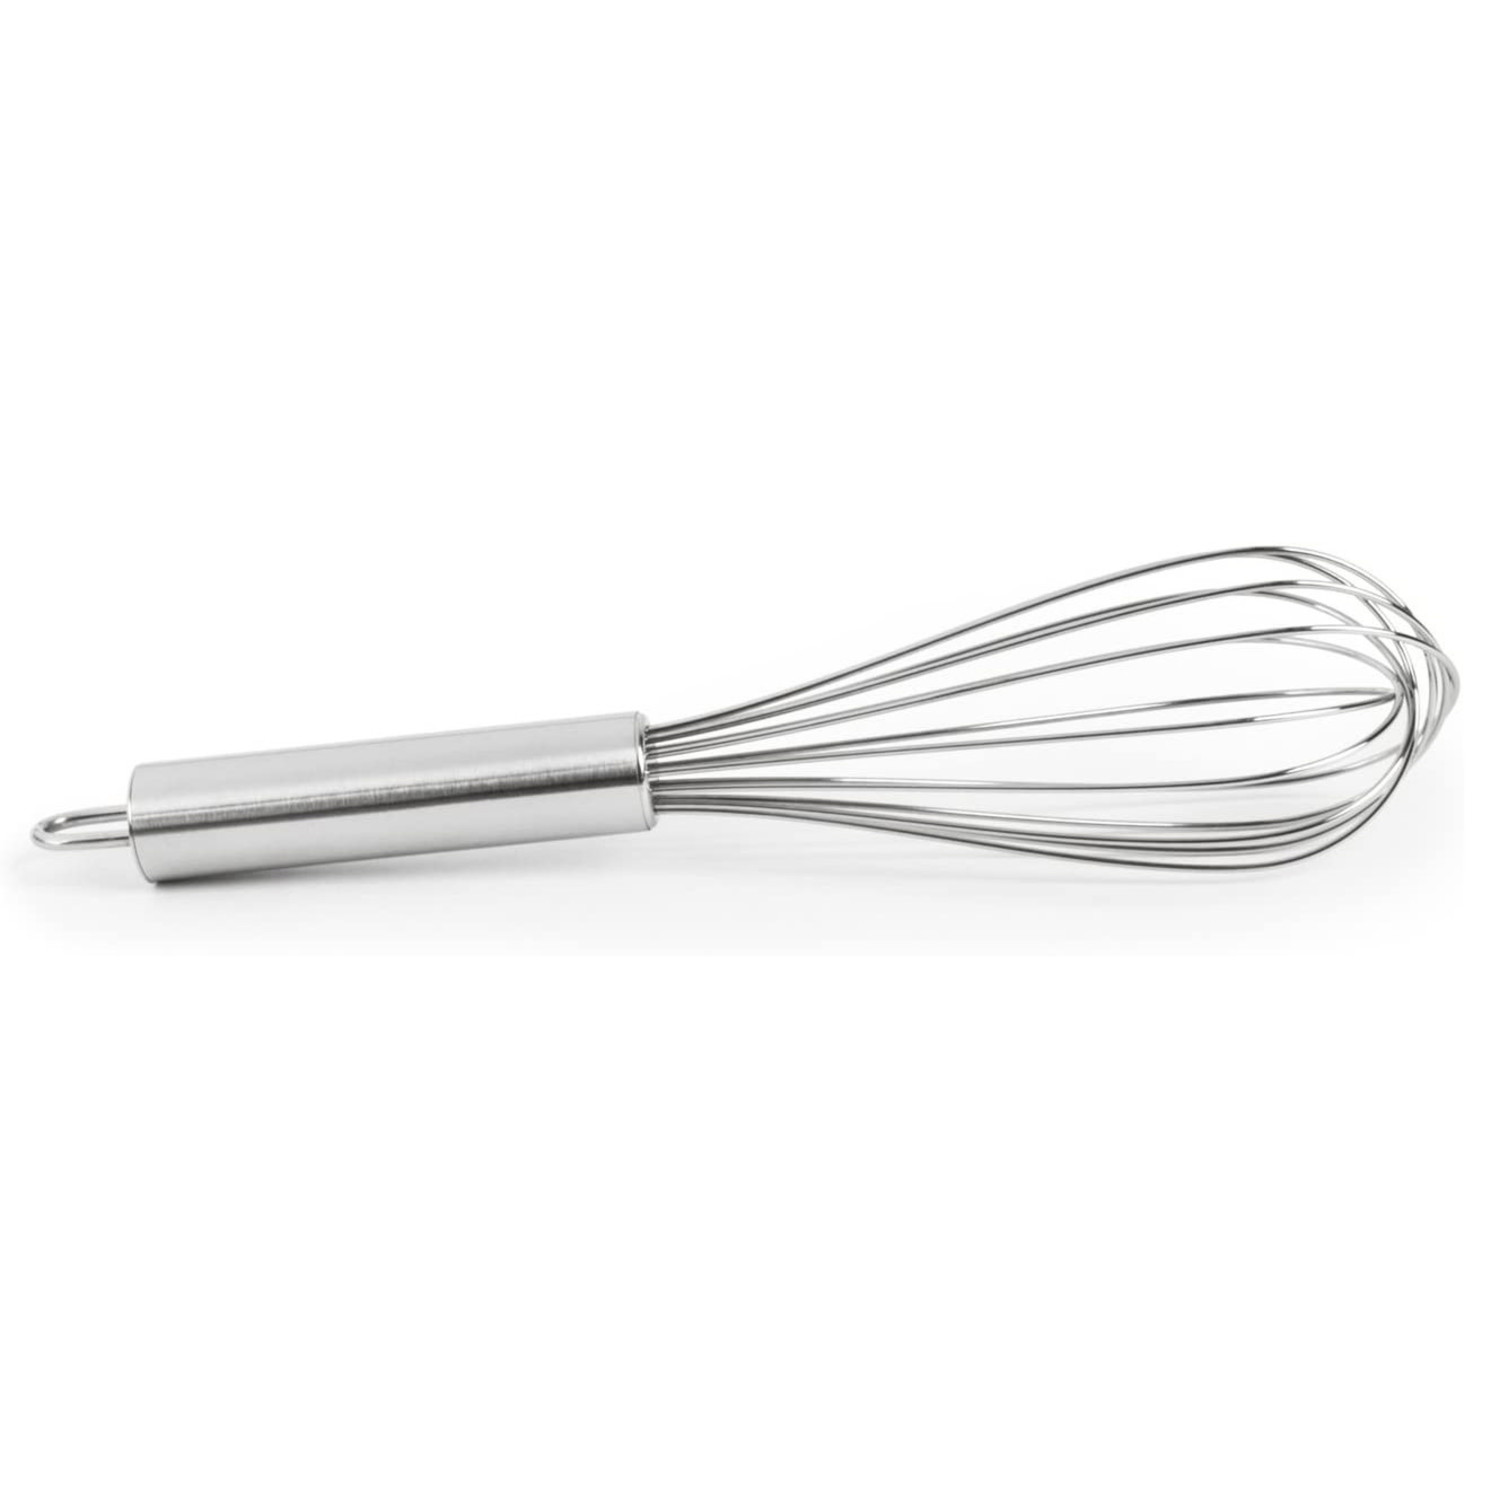 HASEGAWA Stainless Steel Whisk 8 Wires